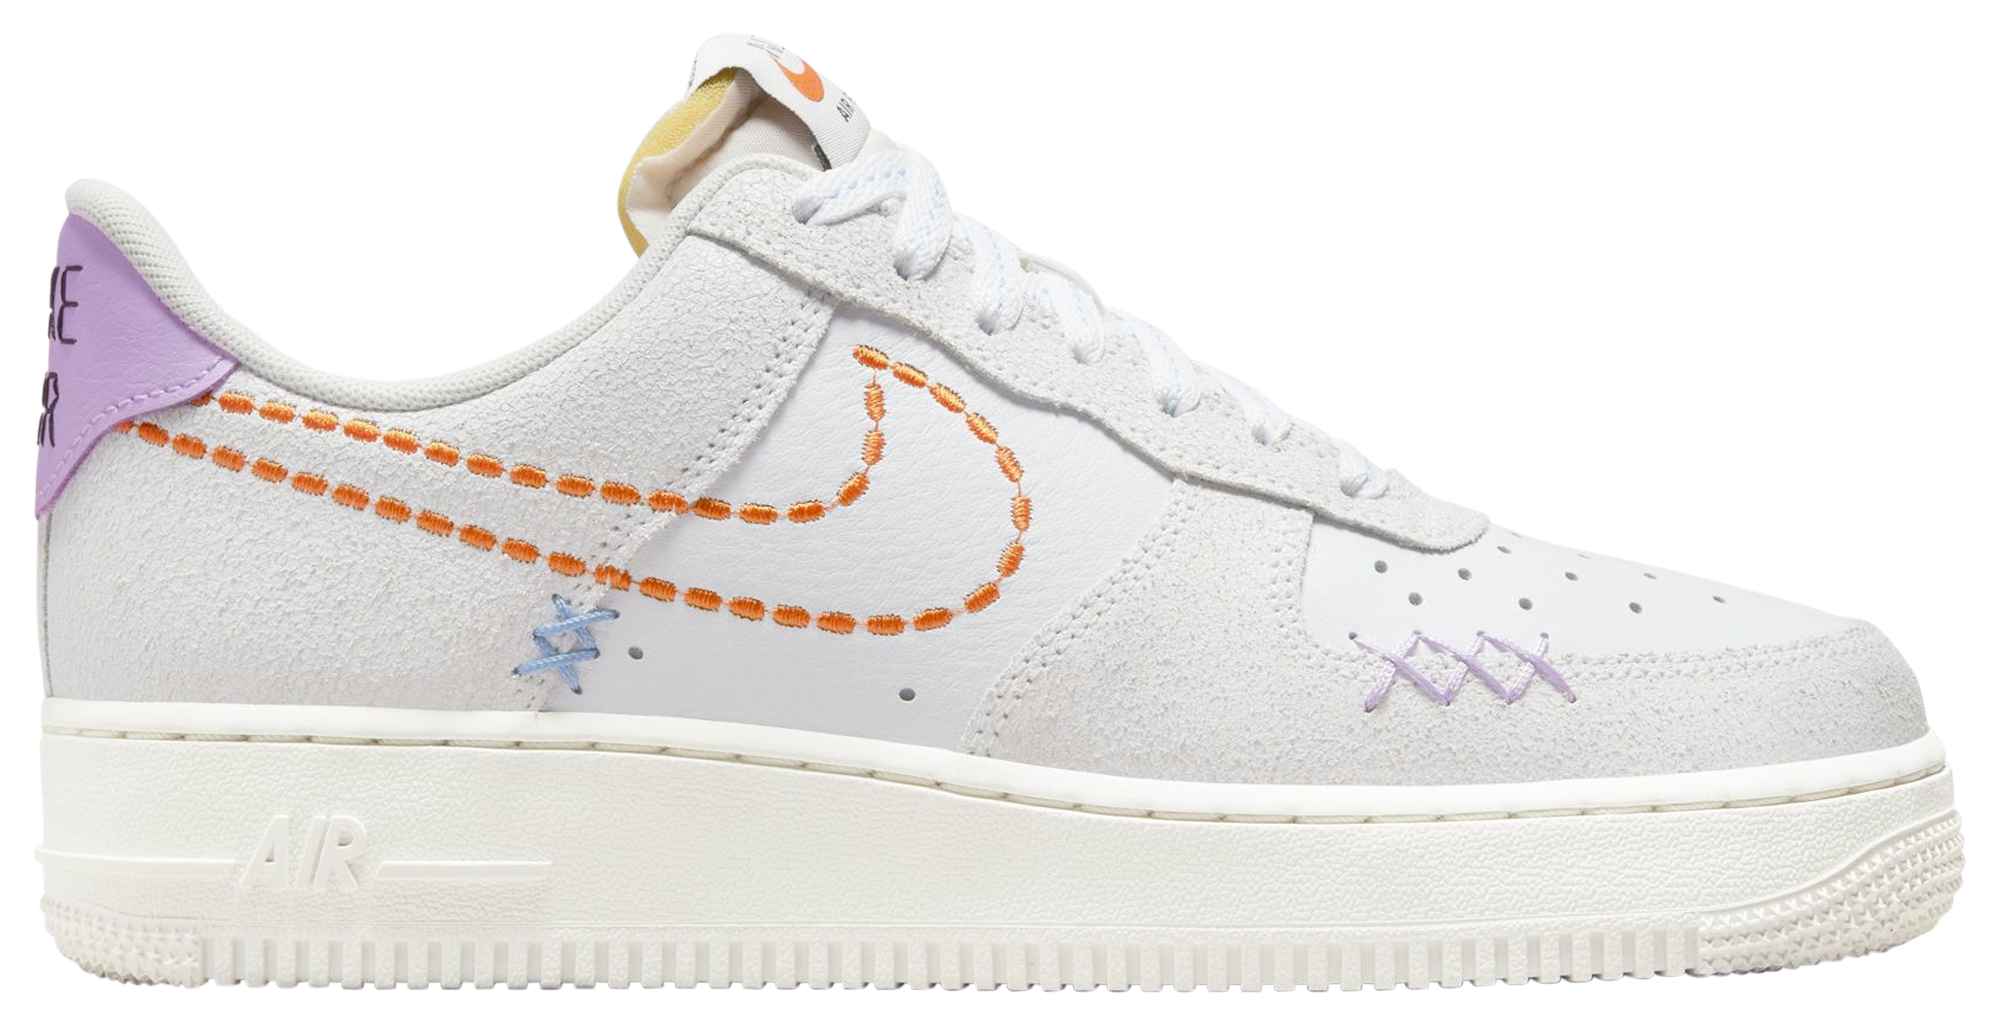 Women's Nike Air Force 1 Low '07 SE Casual Shoes